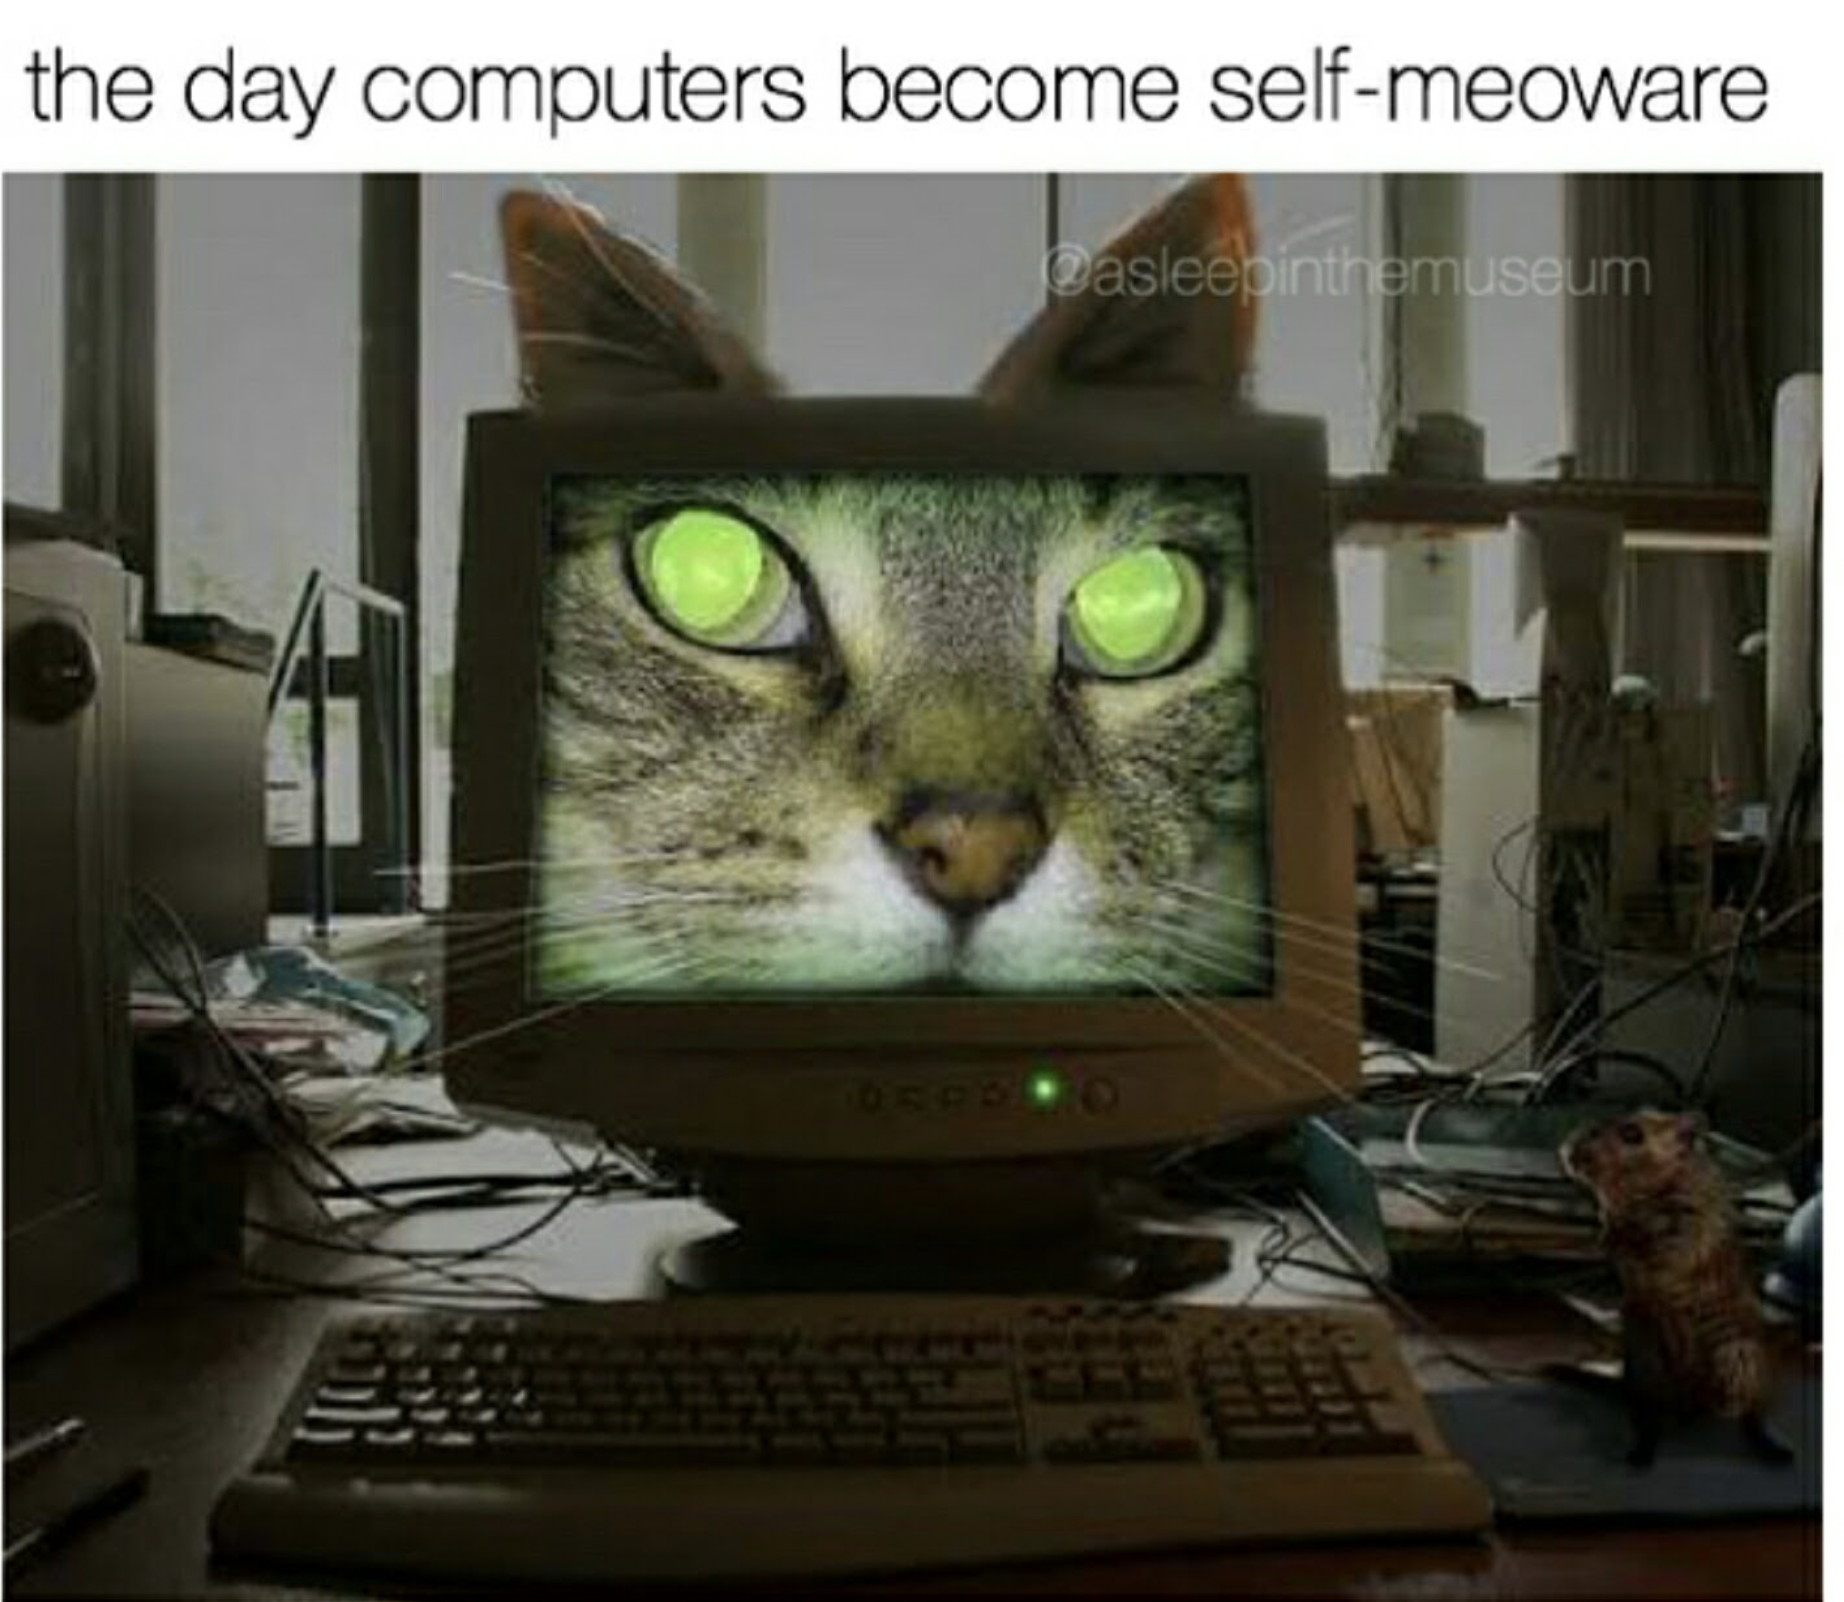 gaming memes  - windows 98 monitor - the day computers become selfmeoware Dasleepinthemuseum